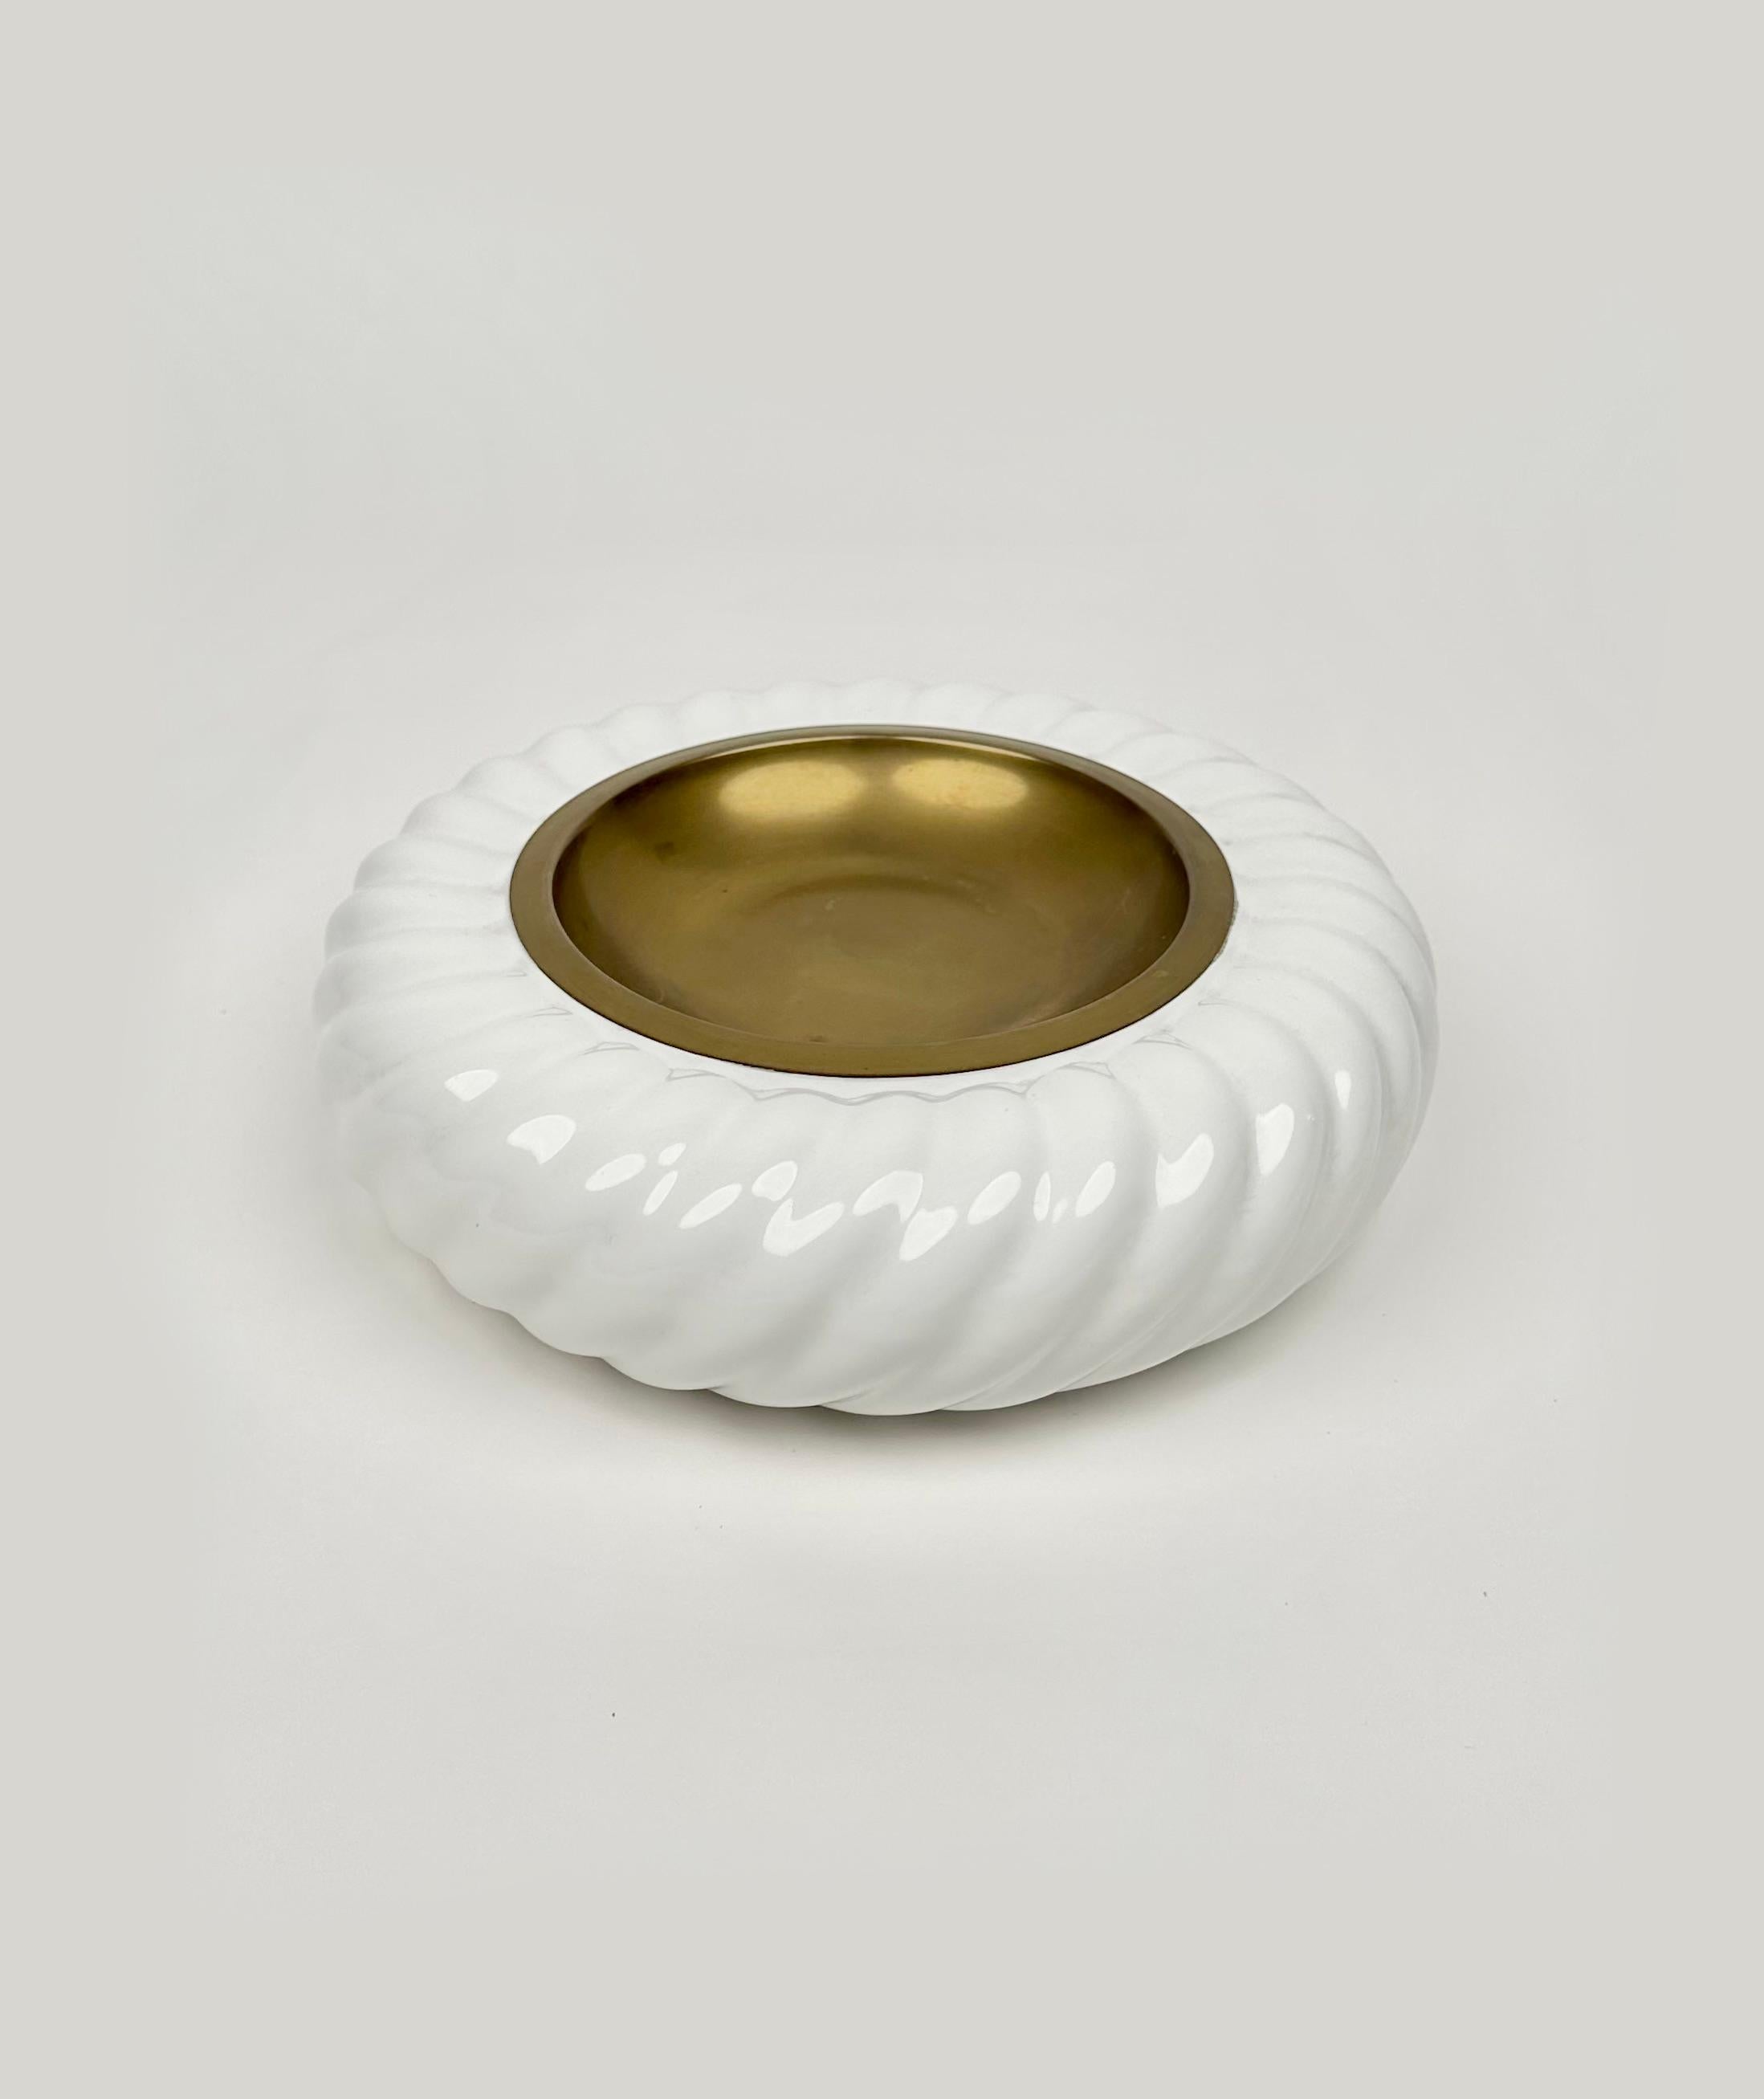 Amazing round ashtray or vide-poche in white ceramic and brass by the Italian designer Tommaso Barbi for B ceramiche.   

Made in Italy in the 1970s.   

Tommaso Barbi signed visible on the bottom, as shown in photos.